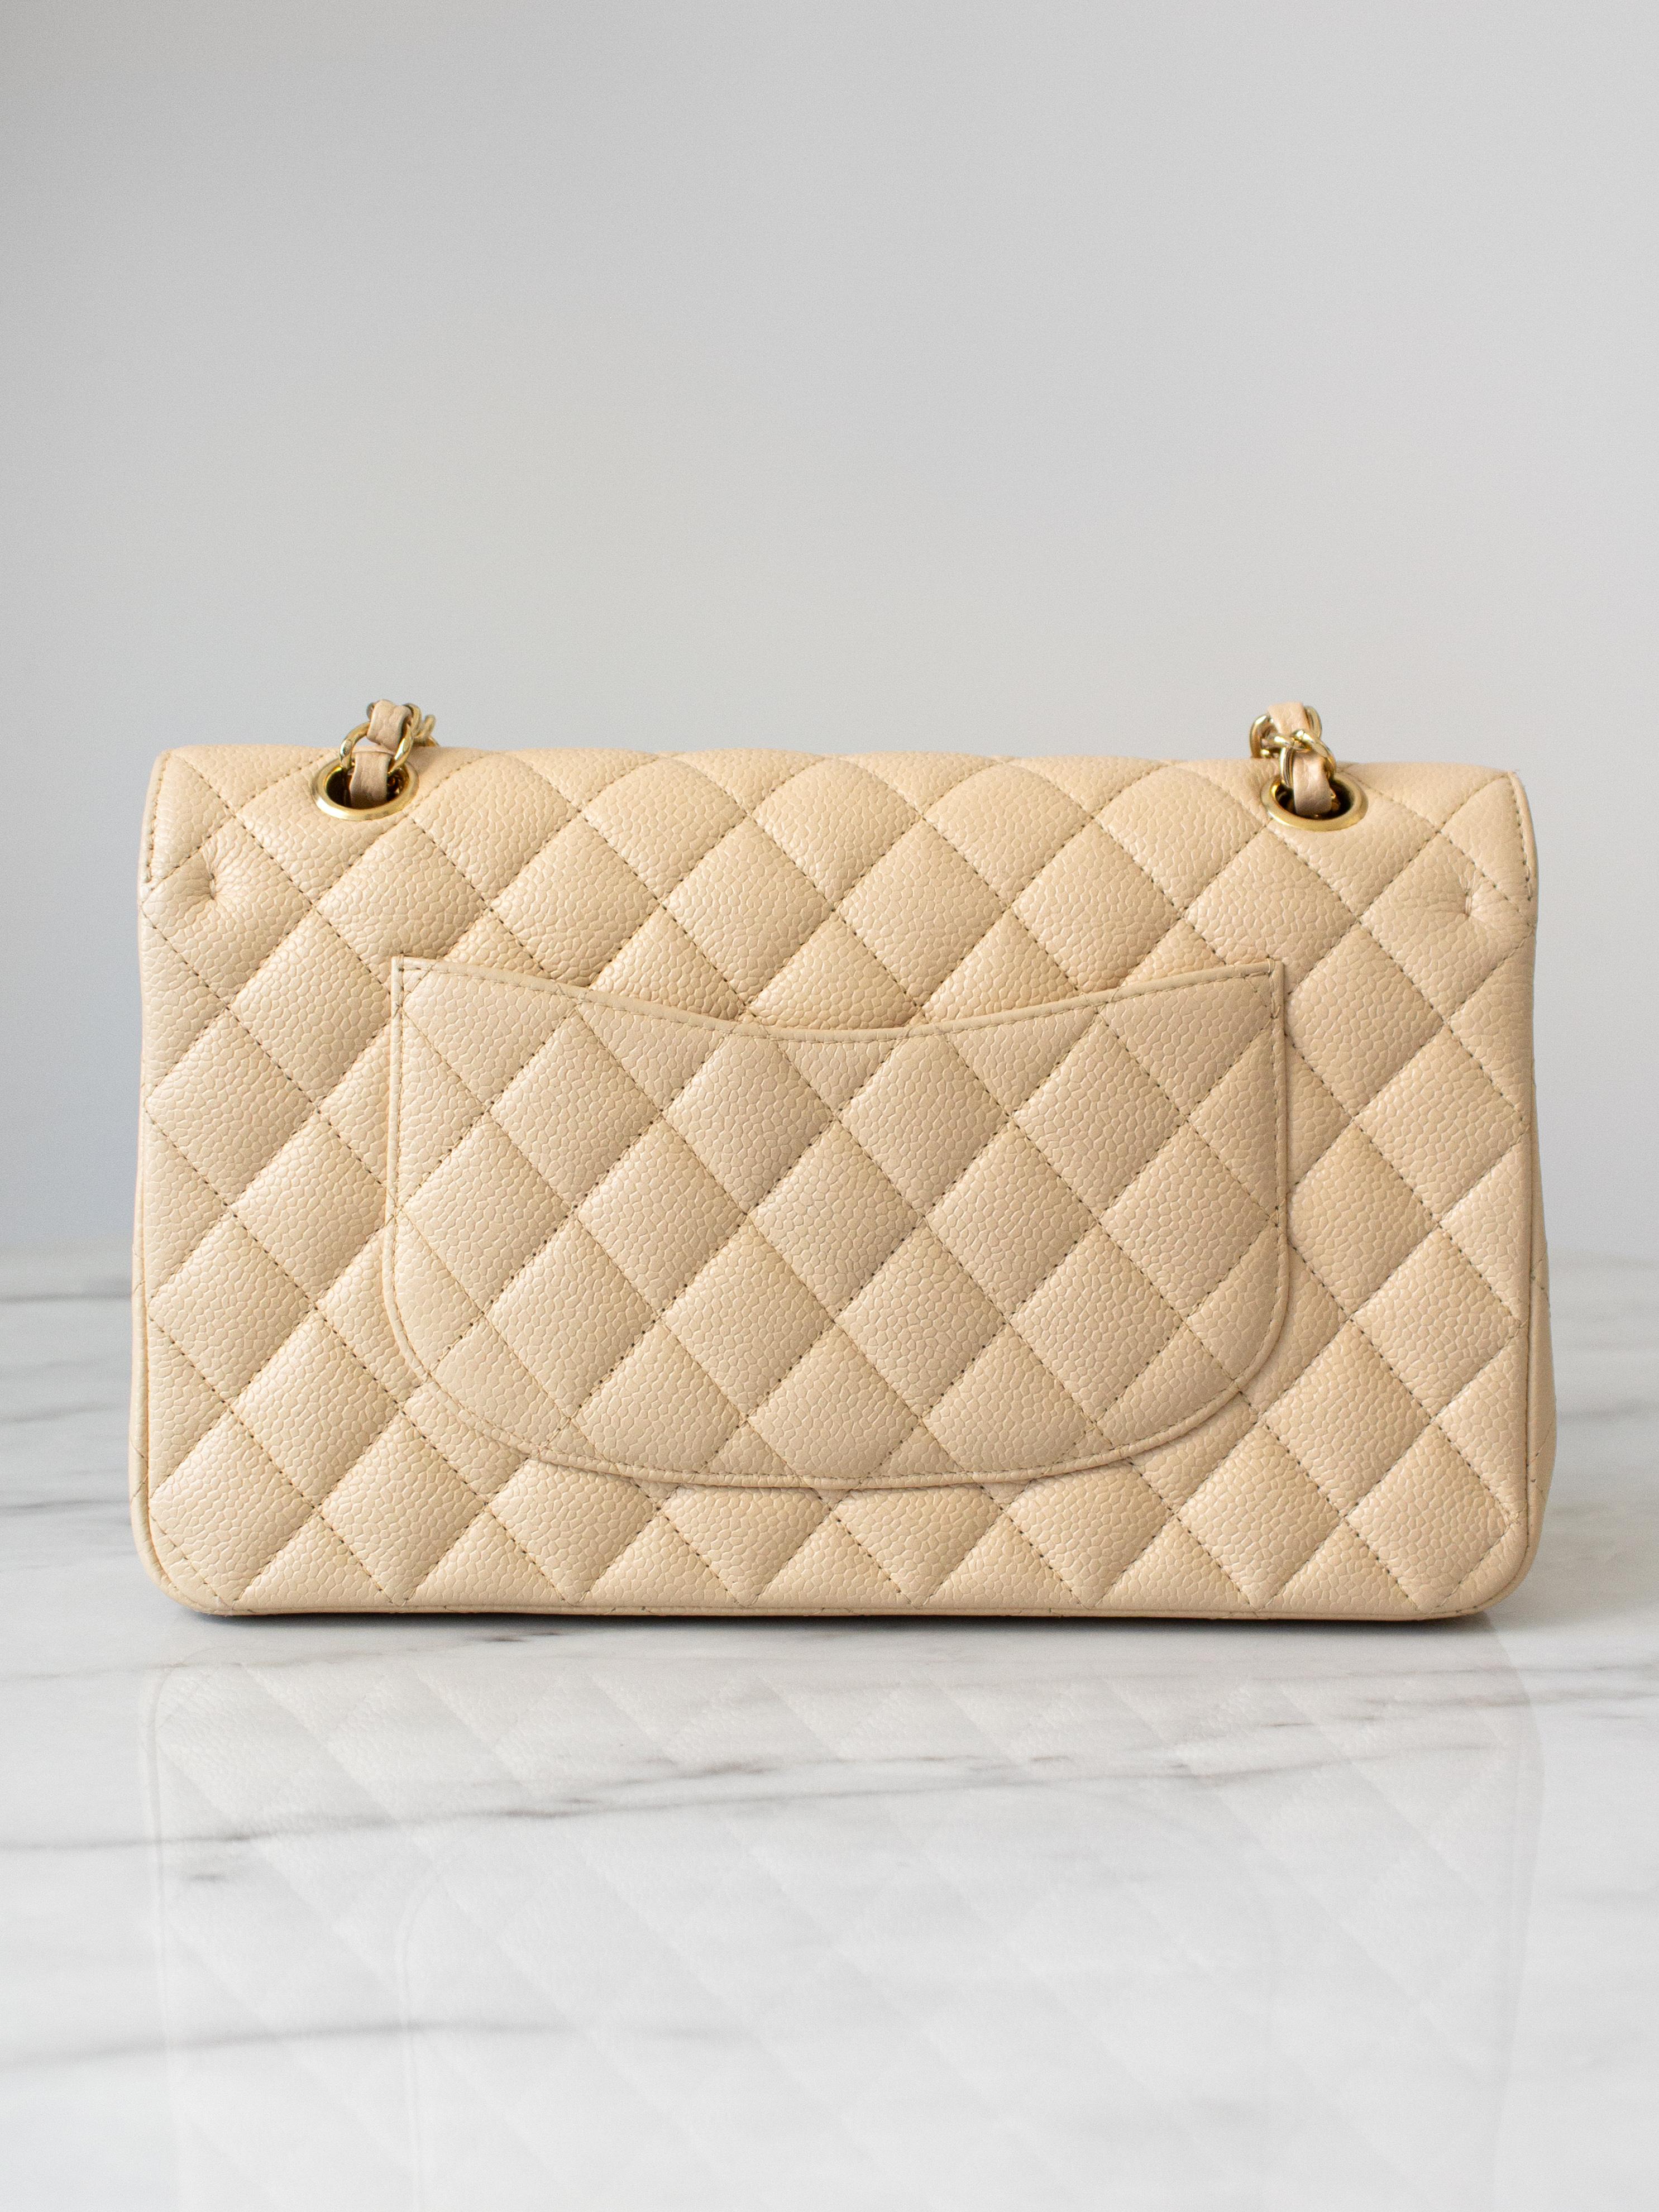 Women's Chanel Medium Classic Double Flap Beige Clair Caviar Leather Gold GHW 2010 Bag For Sale